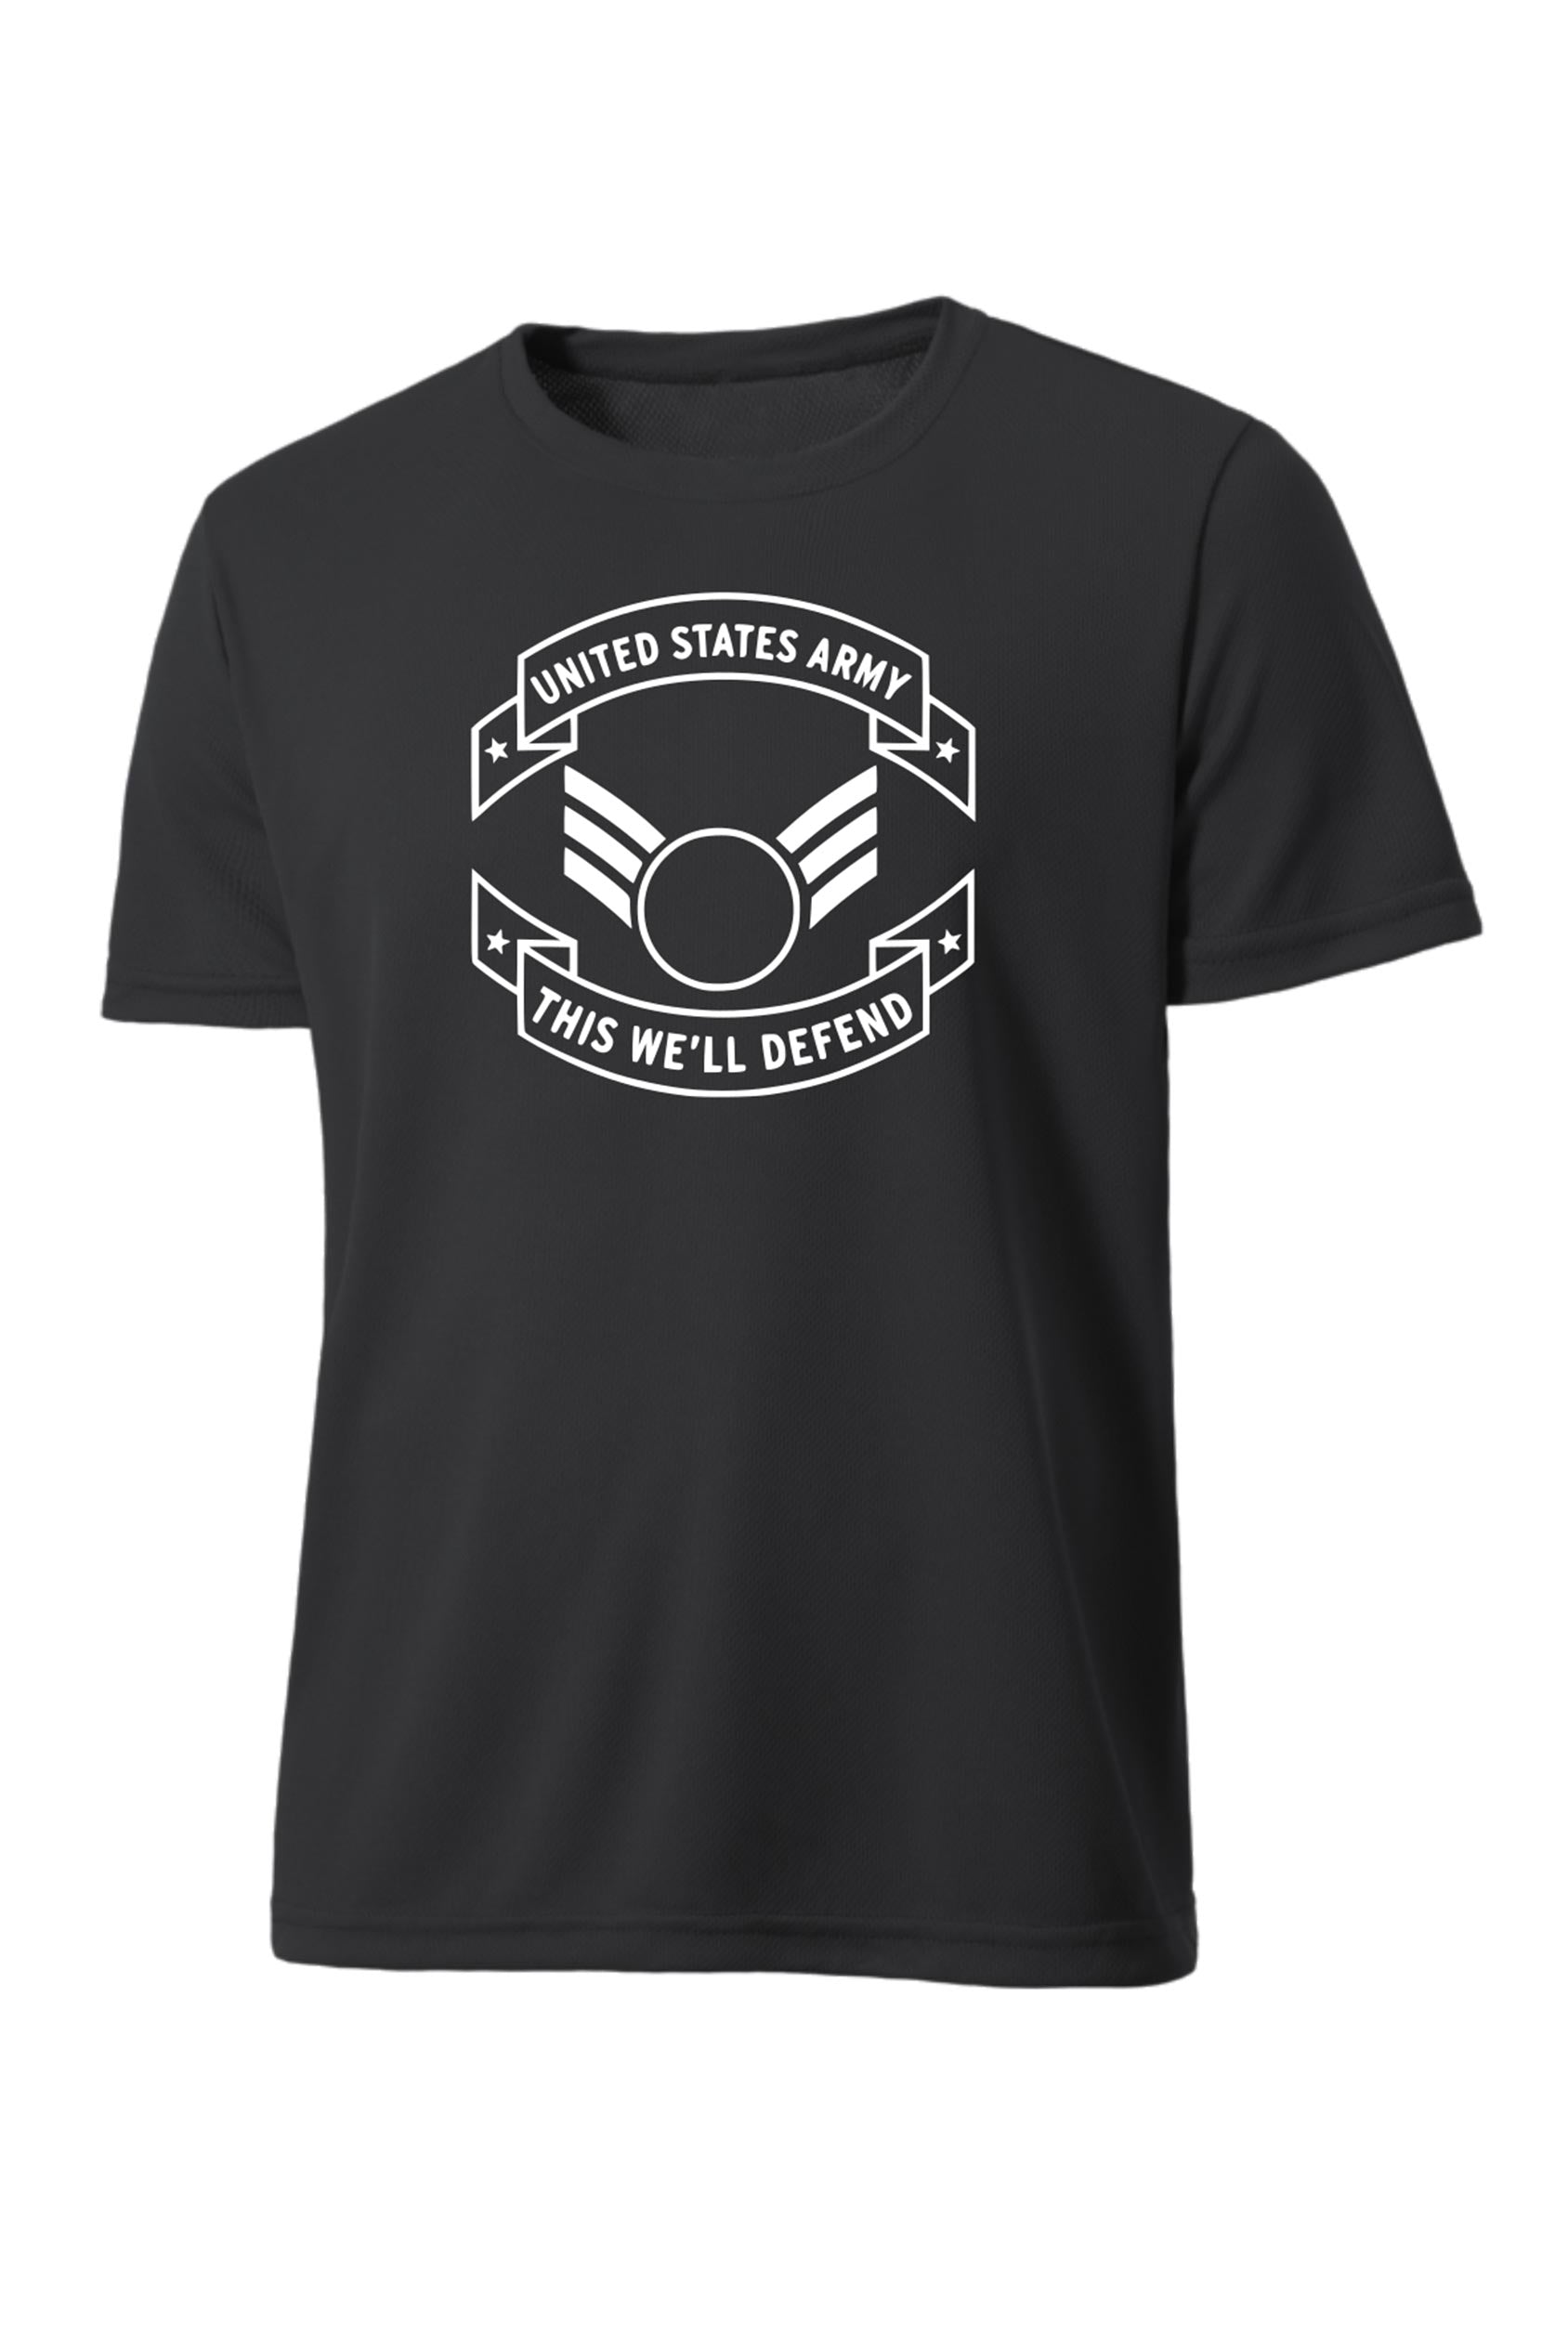 Army Defend Crest Performance T-Shirt 🇺🇸